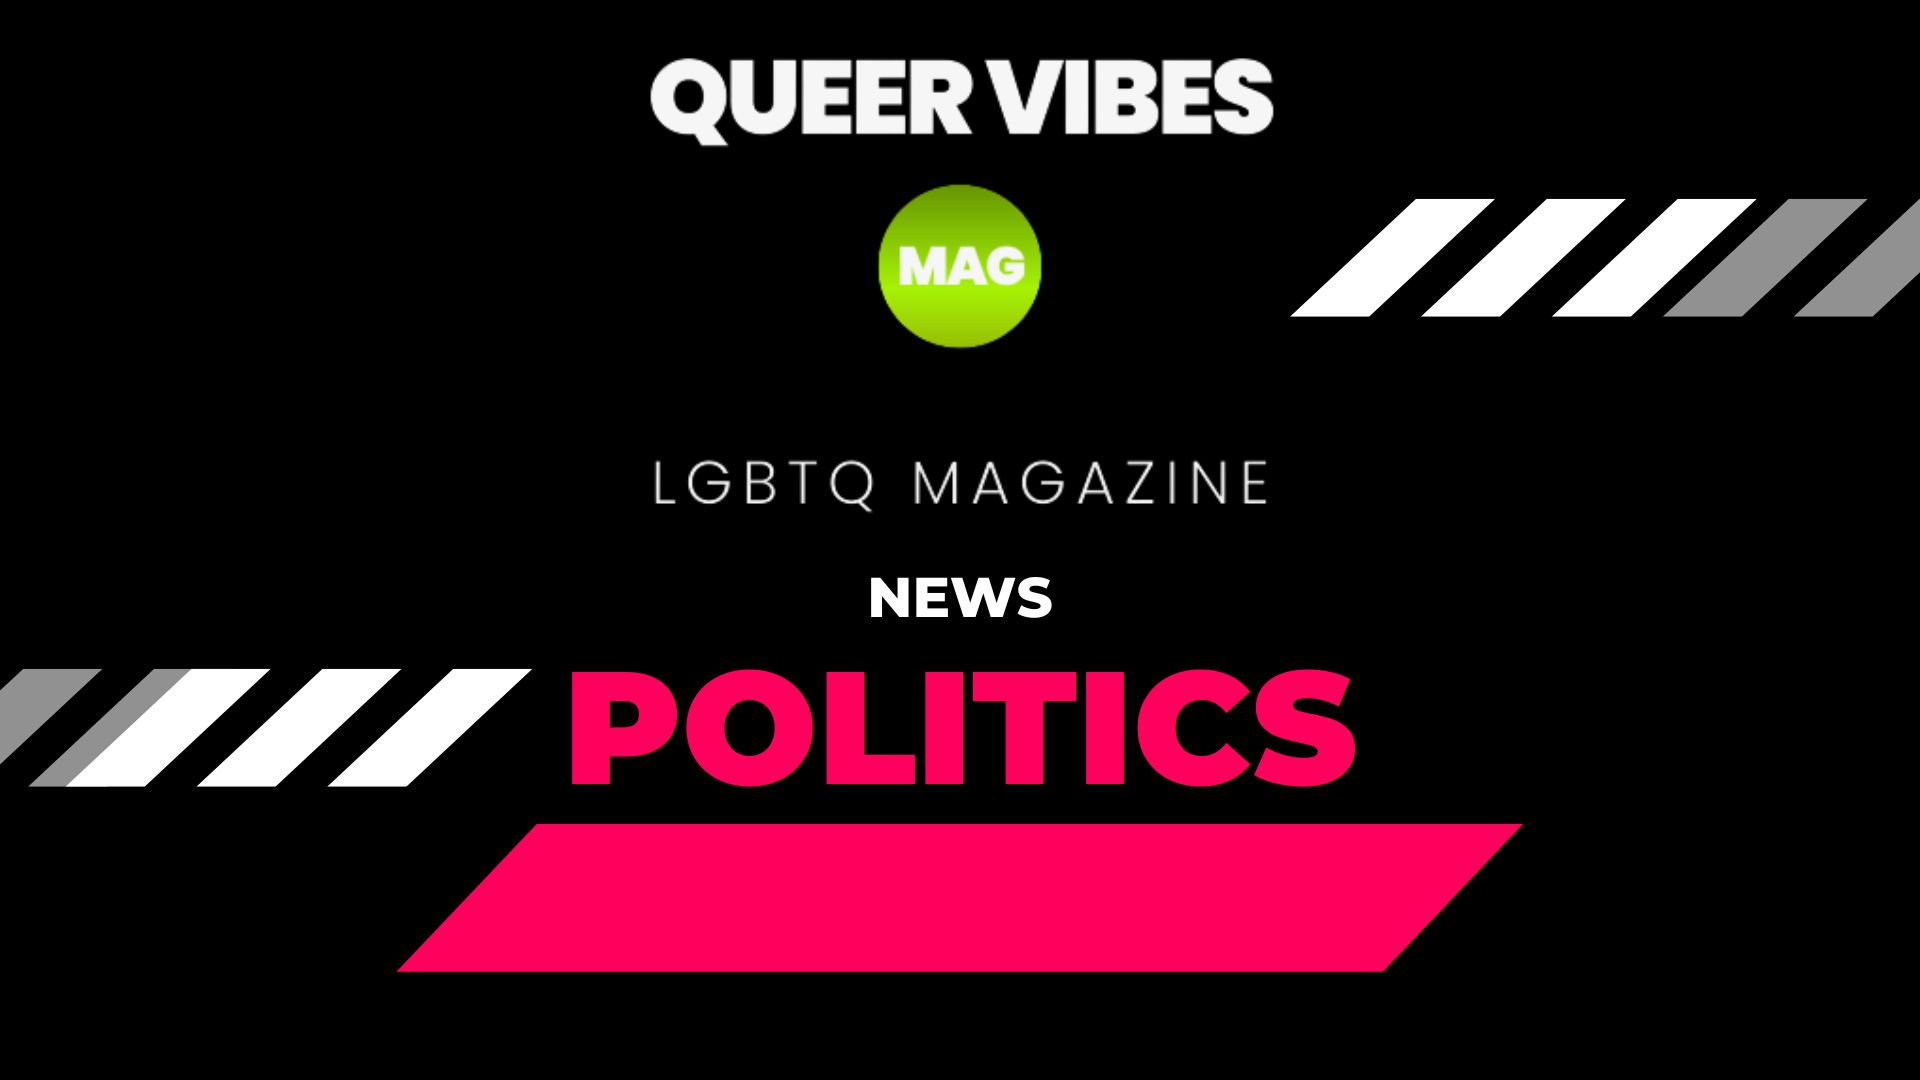 A graphic representing the latest news in LGBT politics from Queer Vibes Magazine.